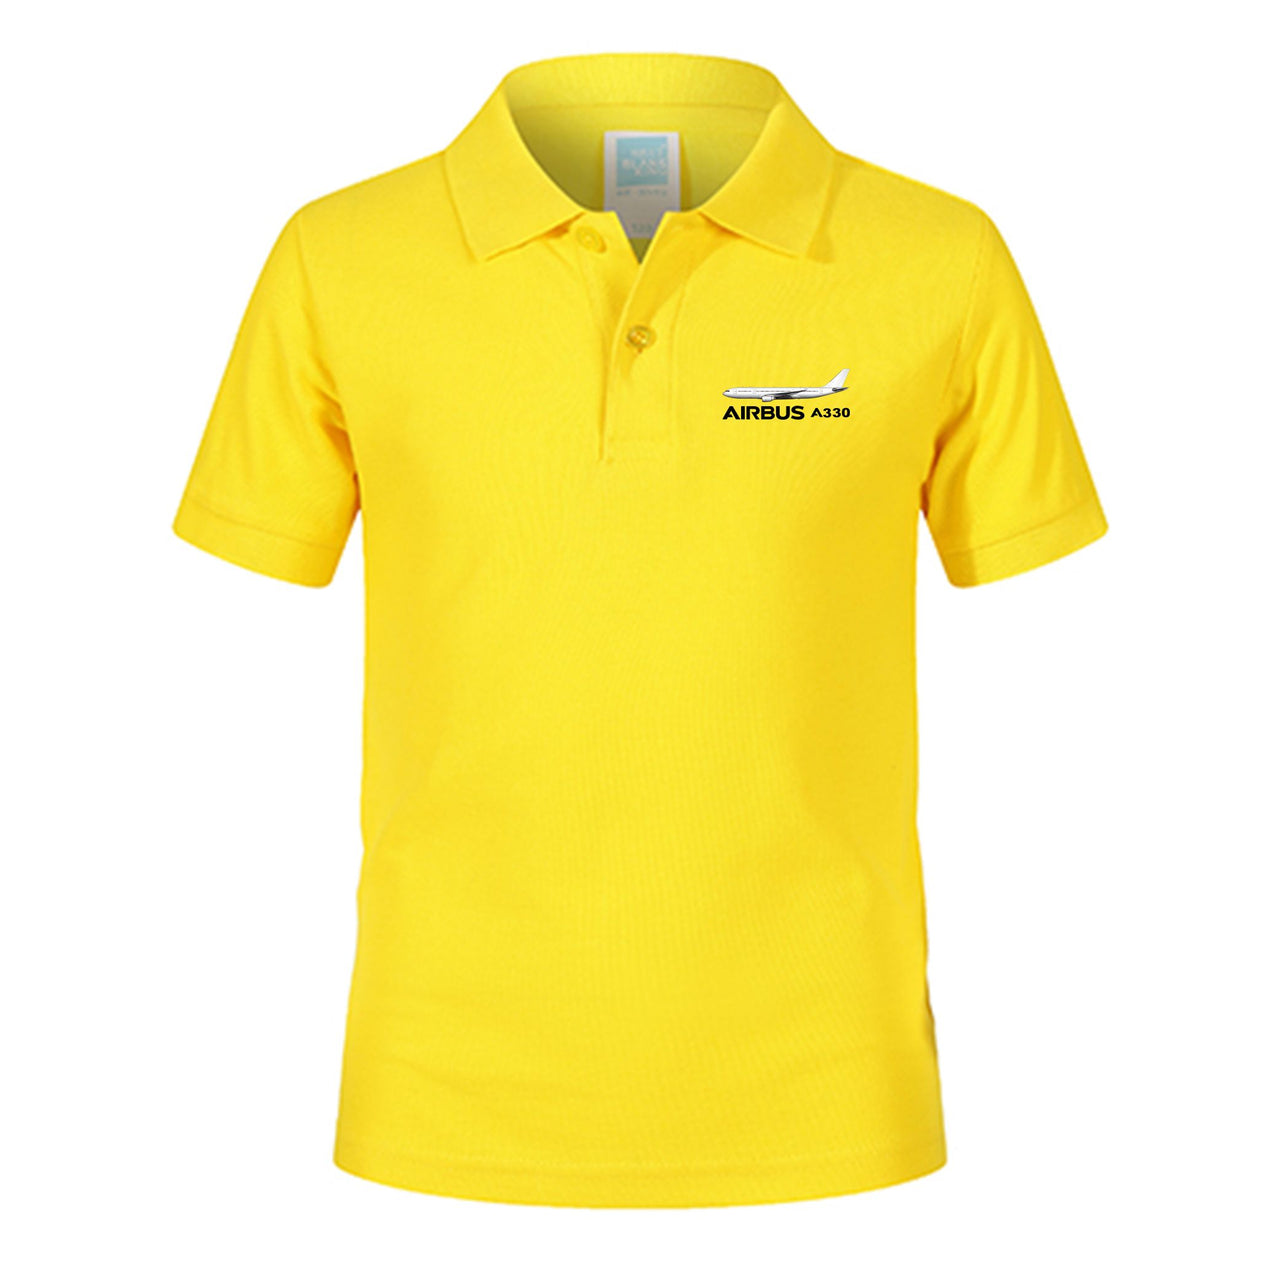 The Airbus A330 Designed Children Polo T-Shirts